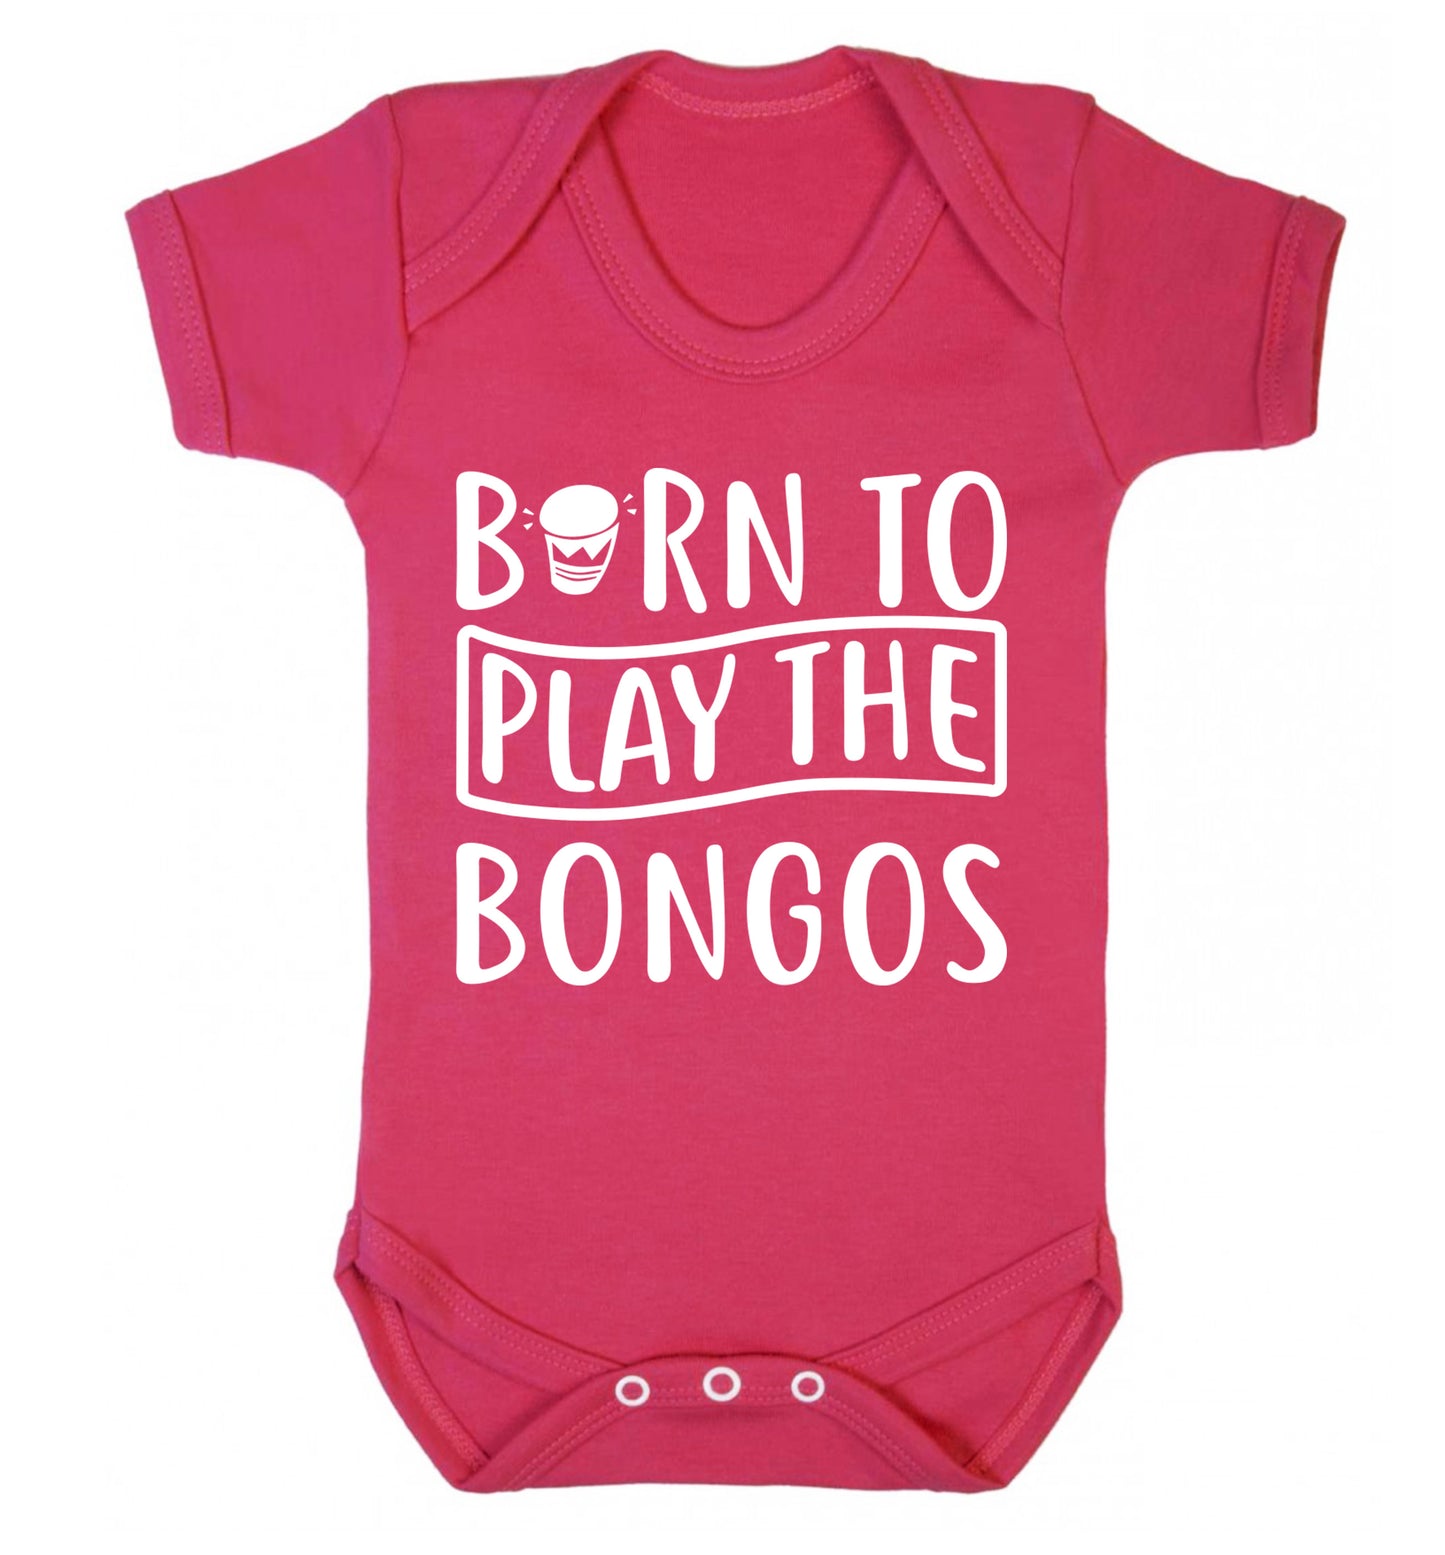 Born to play the bongos Baby Vest dark pink 18-24 months